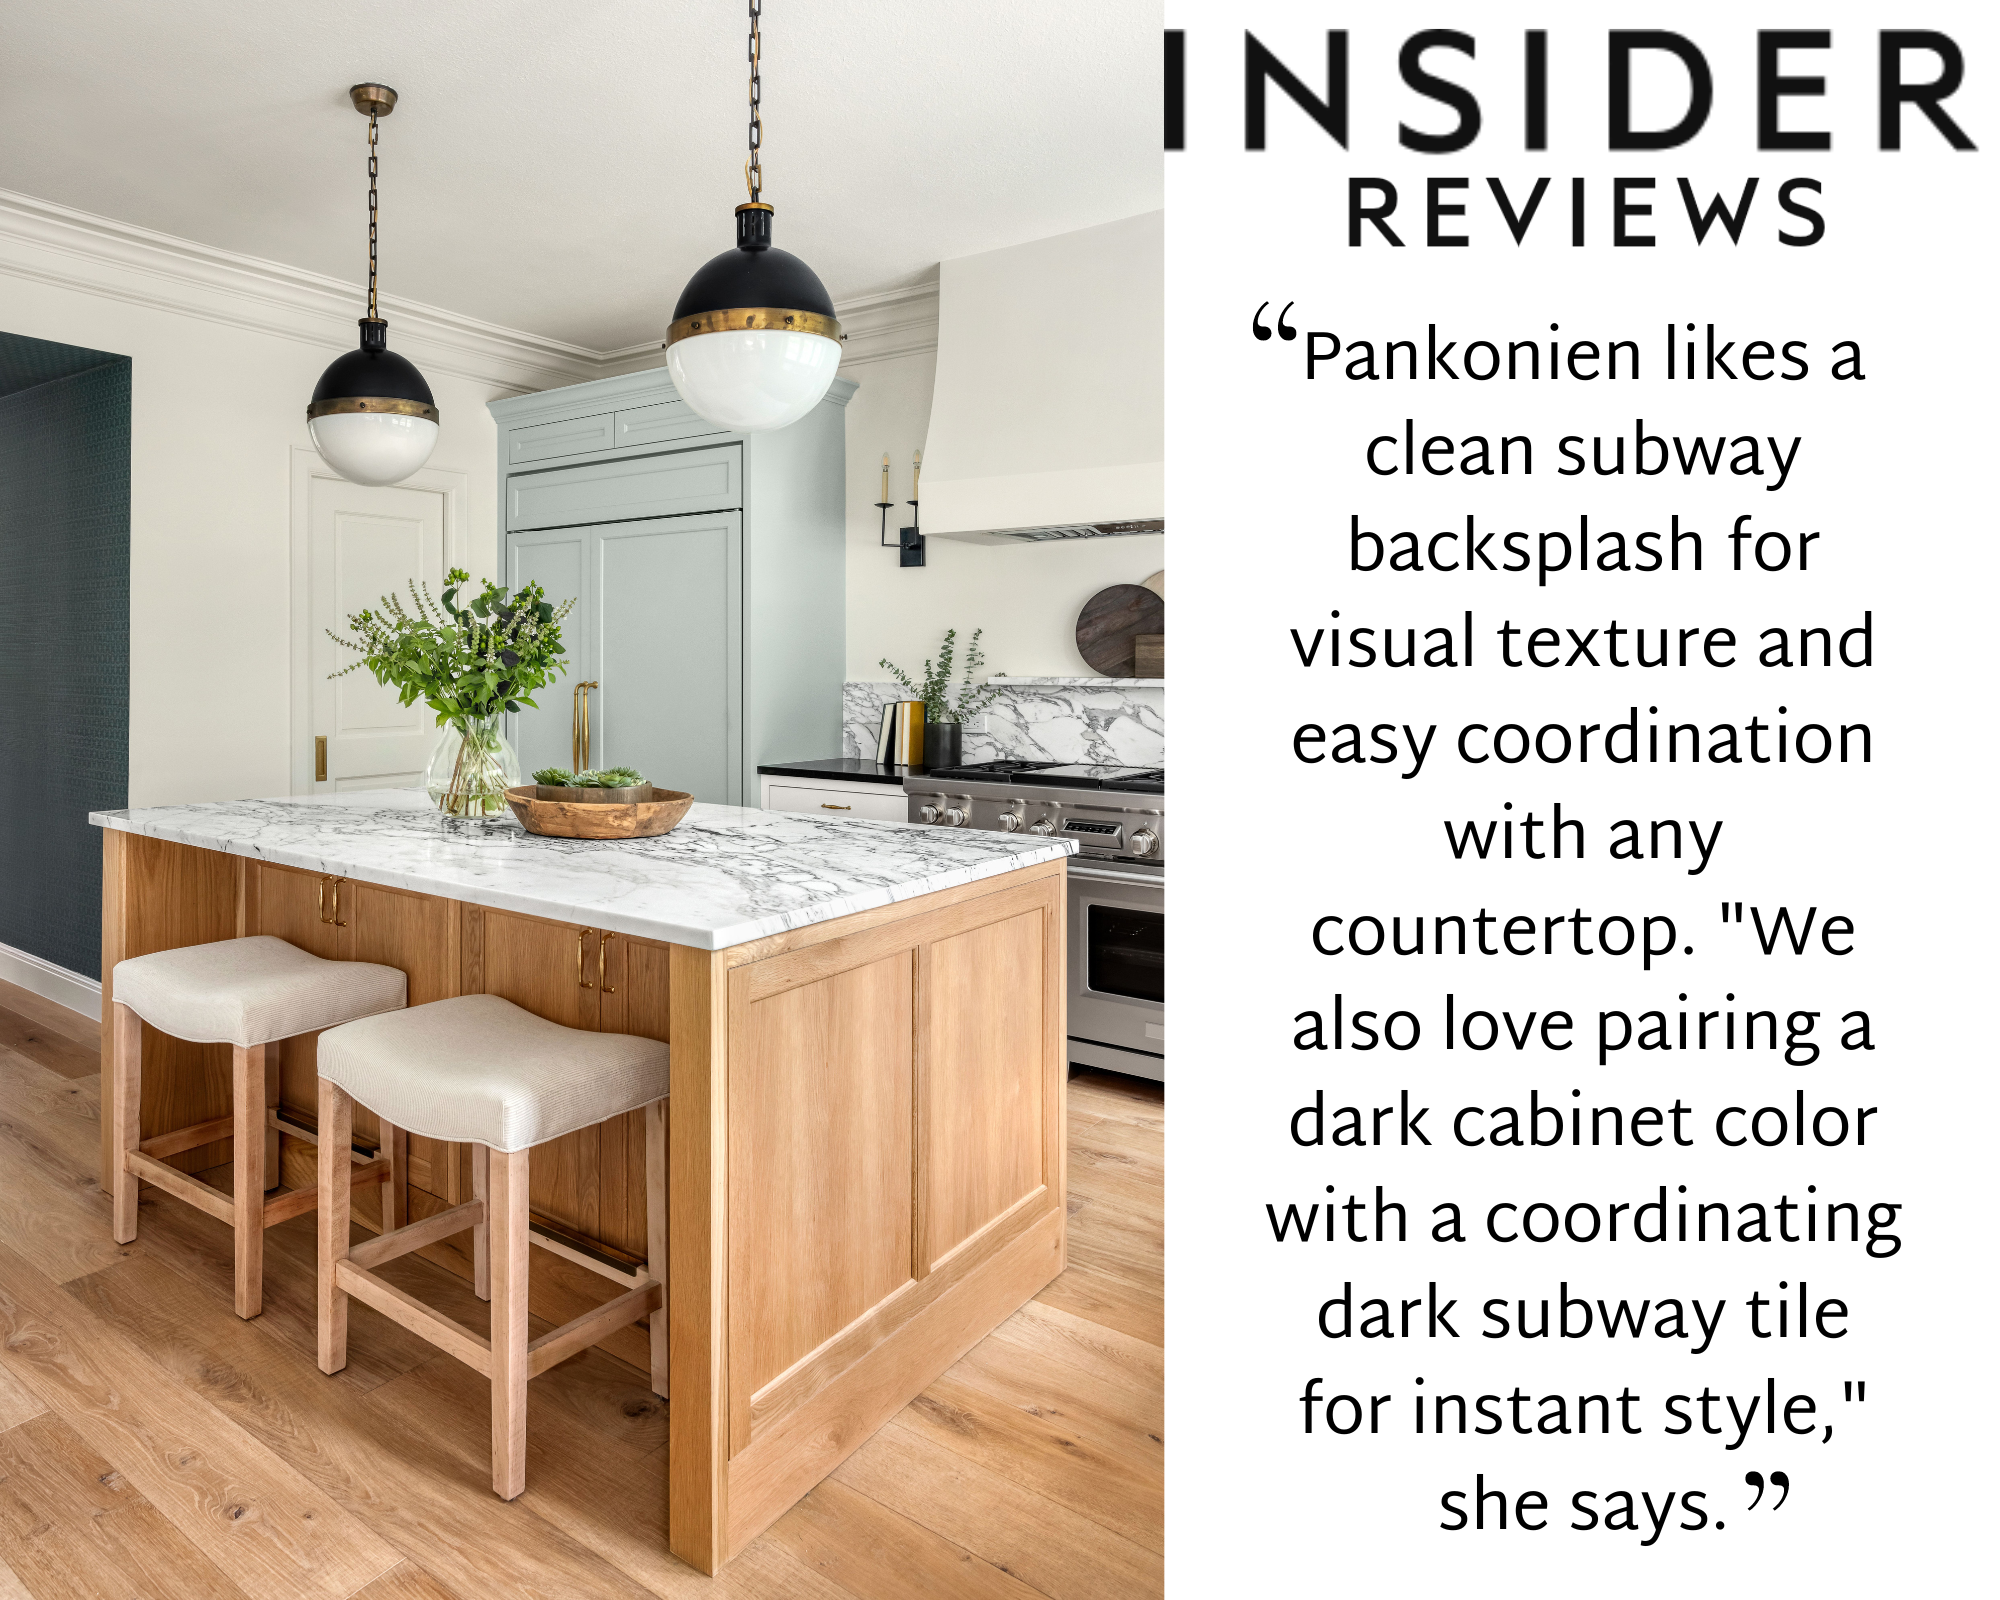 Pankonien likes a clean subway backsplash for visual texture and easy coordination with any countertop. We also love pairing a dark cabinet color with a coordinating dark subway tile for instant style, she says..png